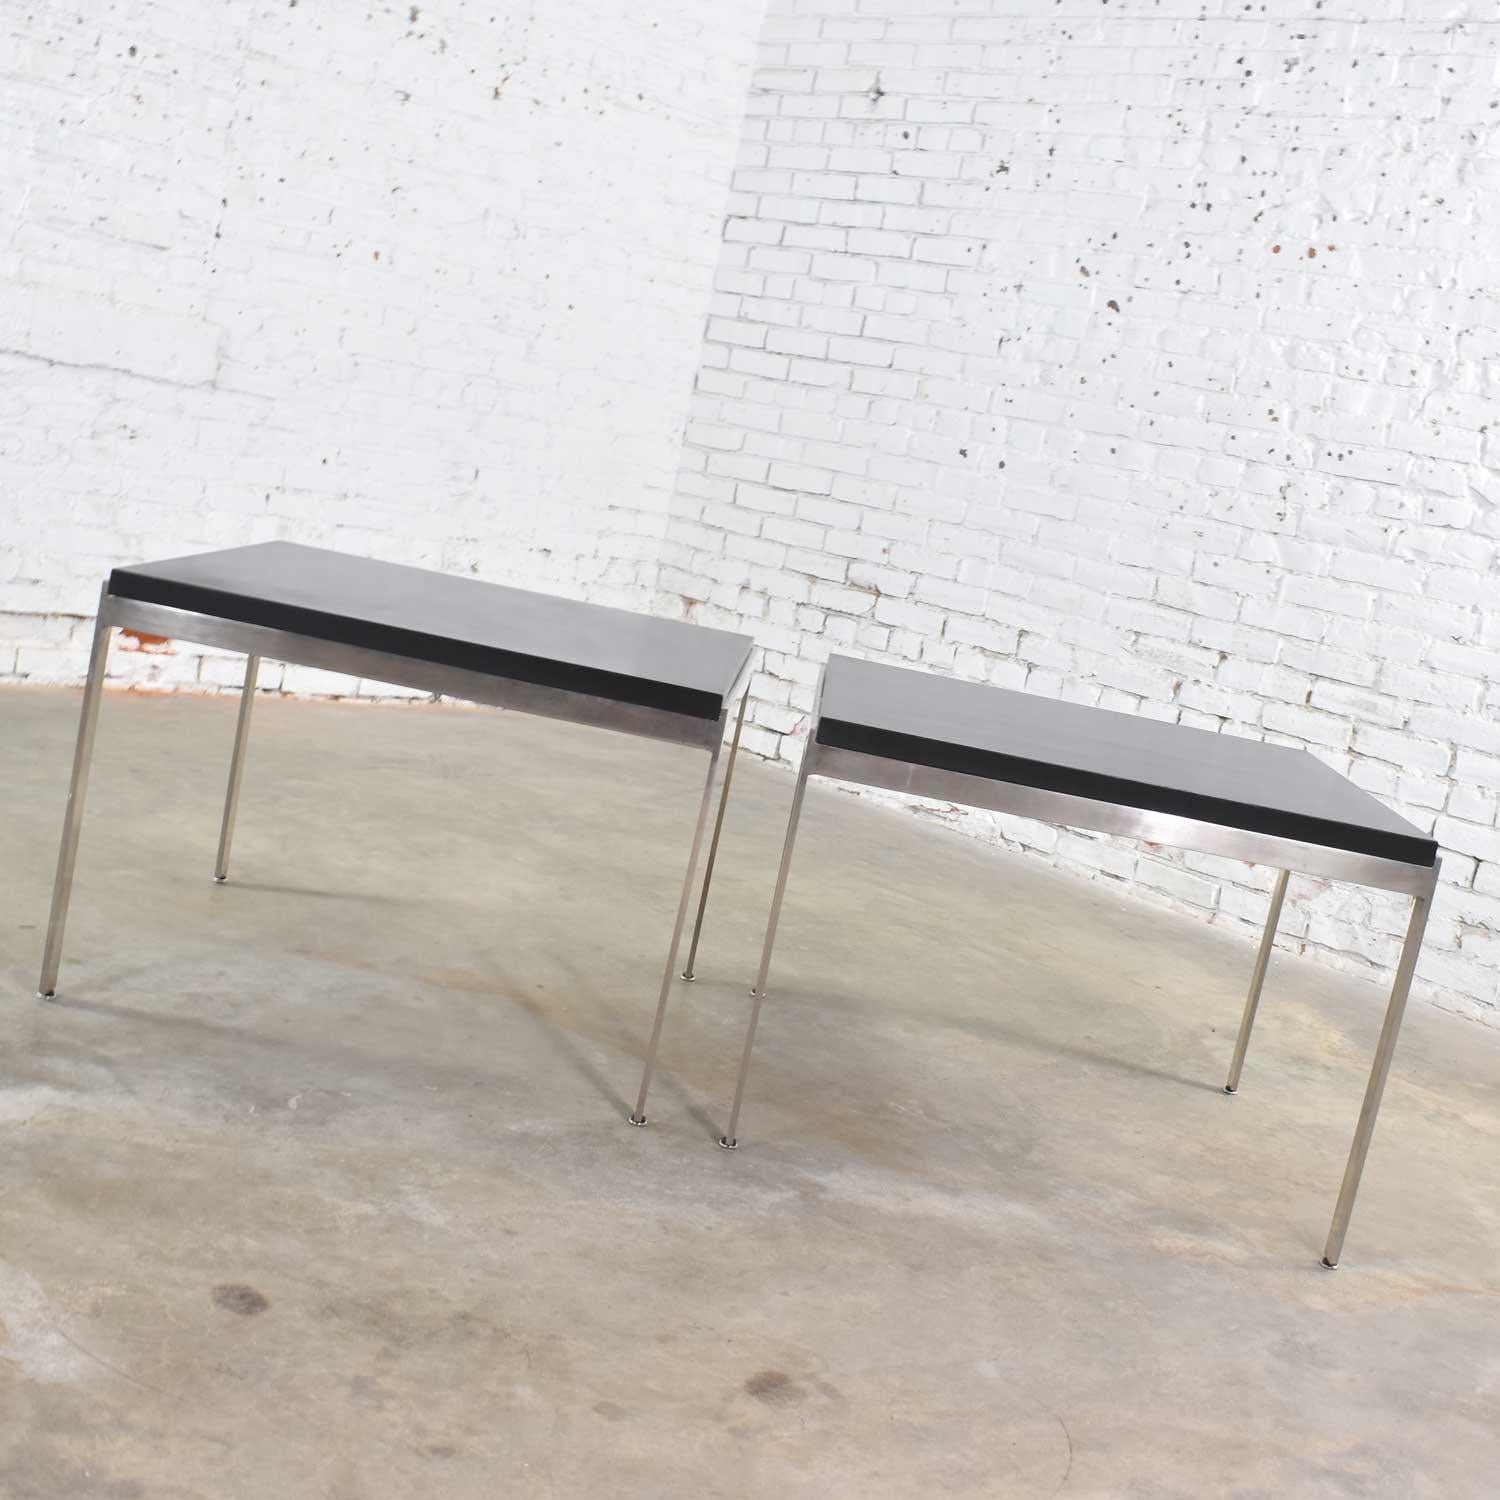 Vintage Large Modern Square End Tables in Stainless Steel Black Laminate Tops 2